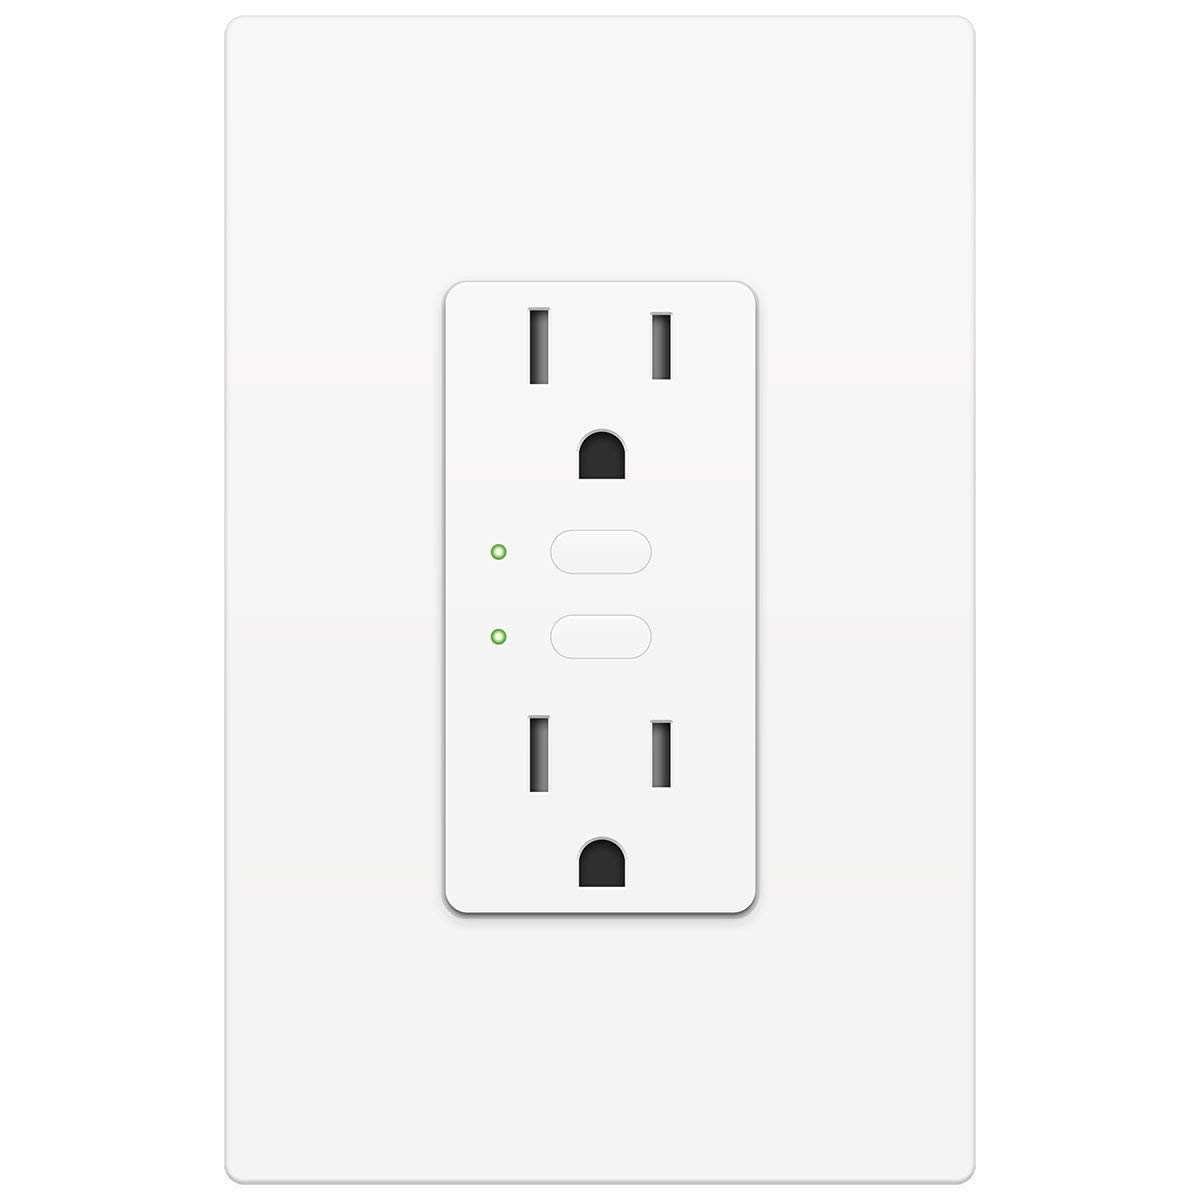 best smart wall outlet